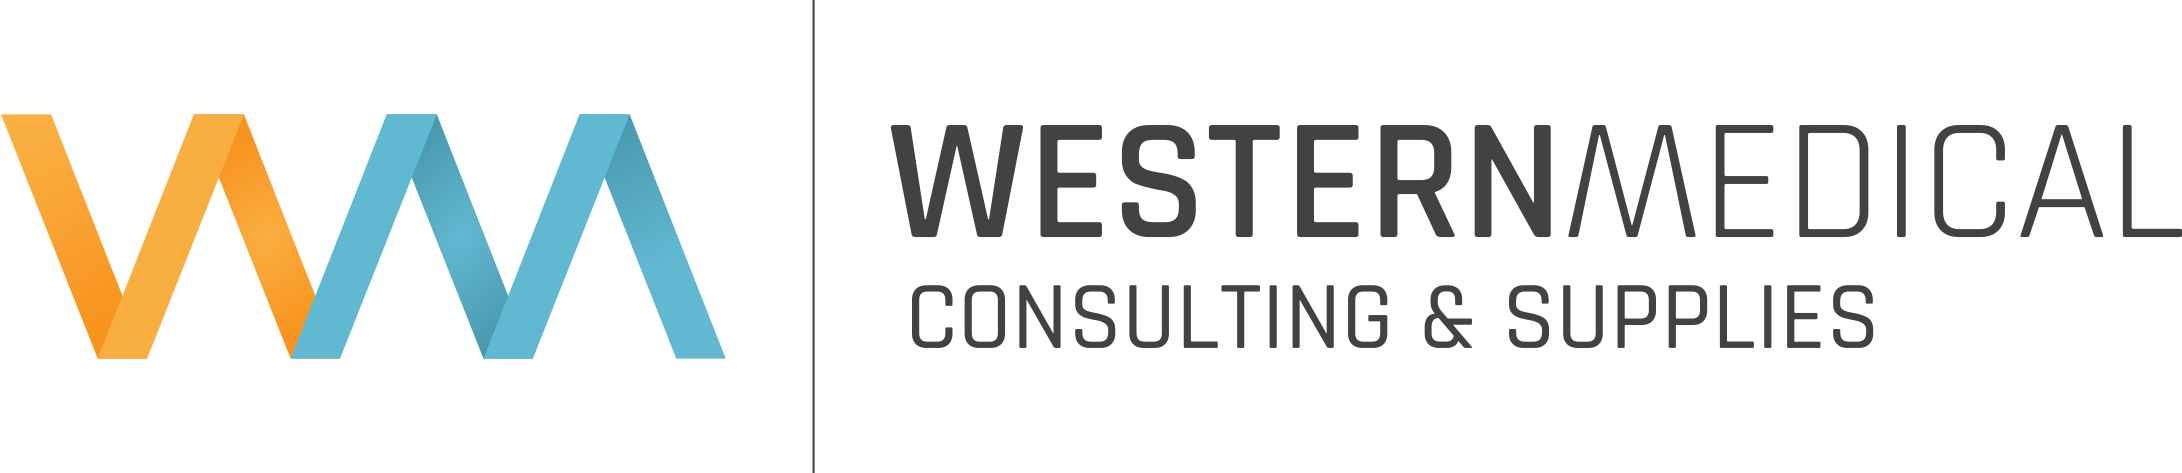 Western Medical Consulting & Supplies